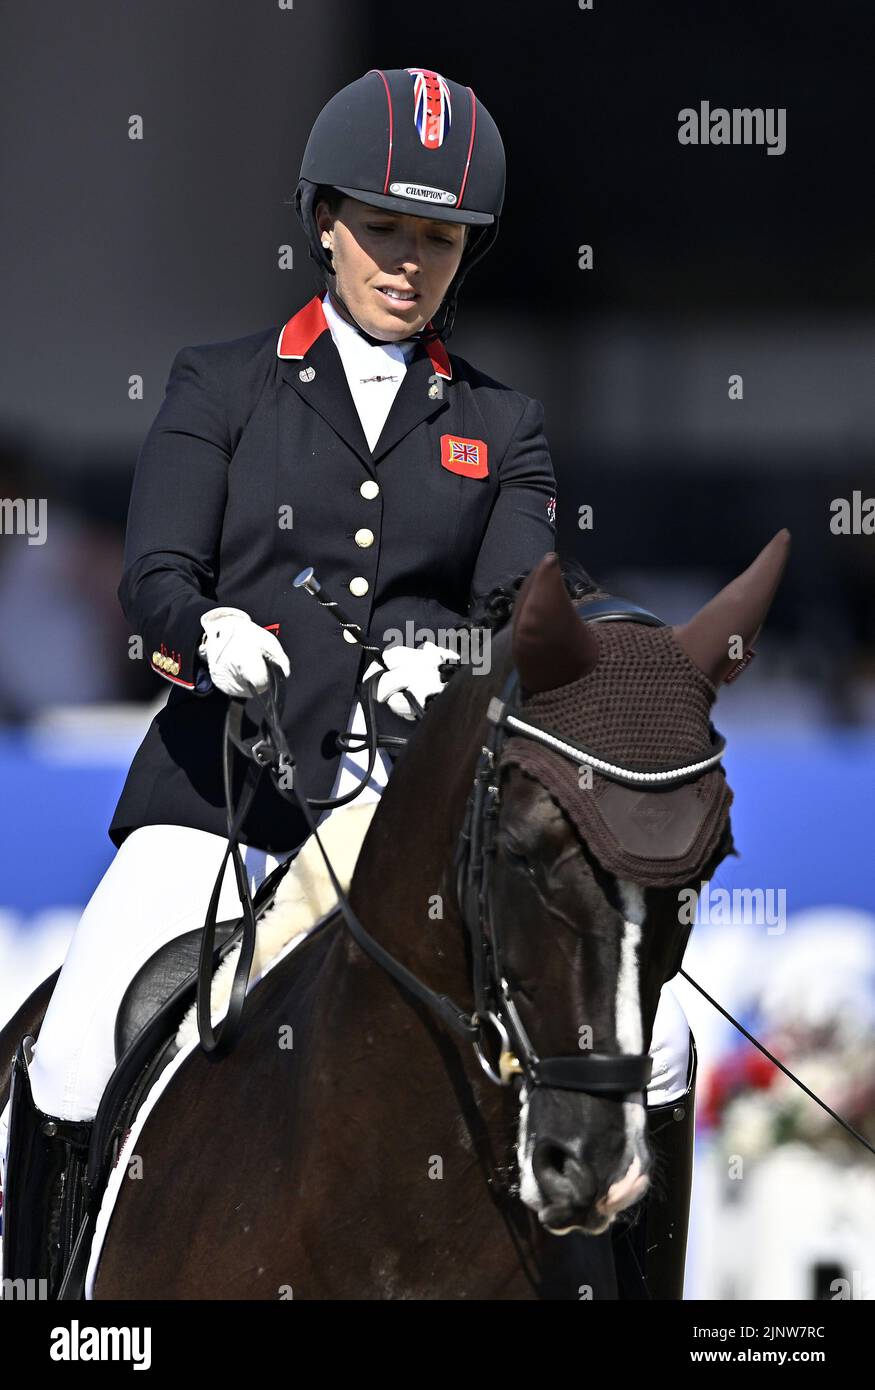 Herning. Denmark. 13 August 2022. World Equestrian Games.Sophie Wells (GBR) riding DON CARA M during the FEI Para Dressage Team championships - Grade III. Stock Photo